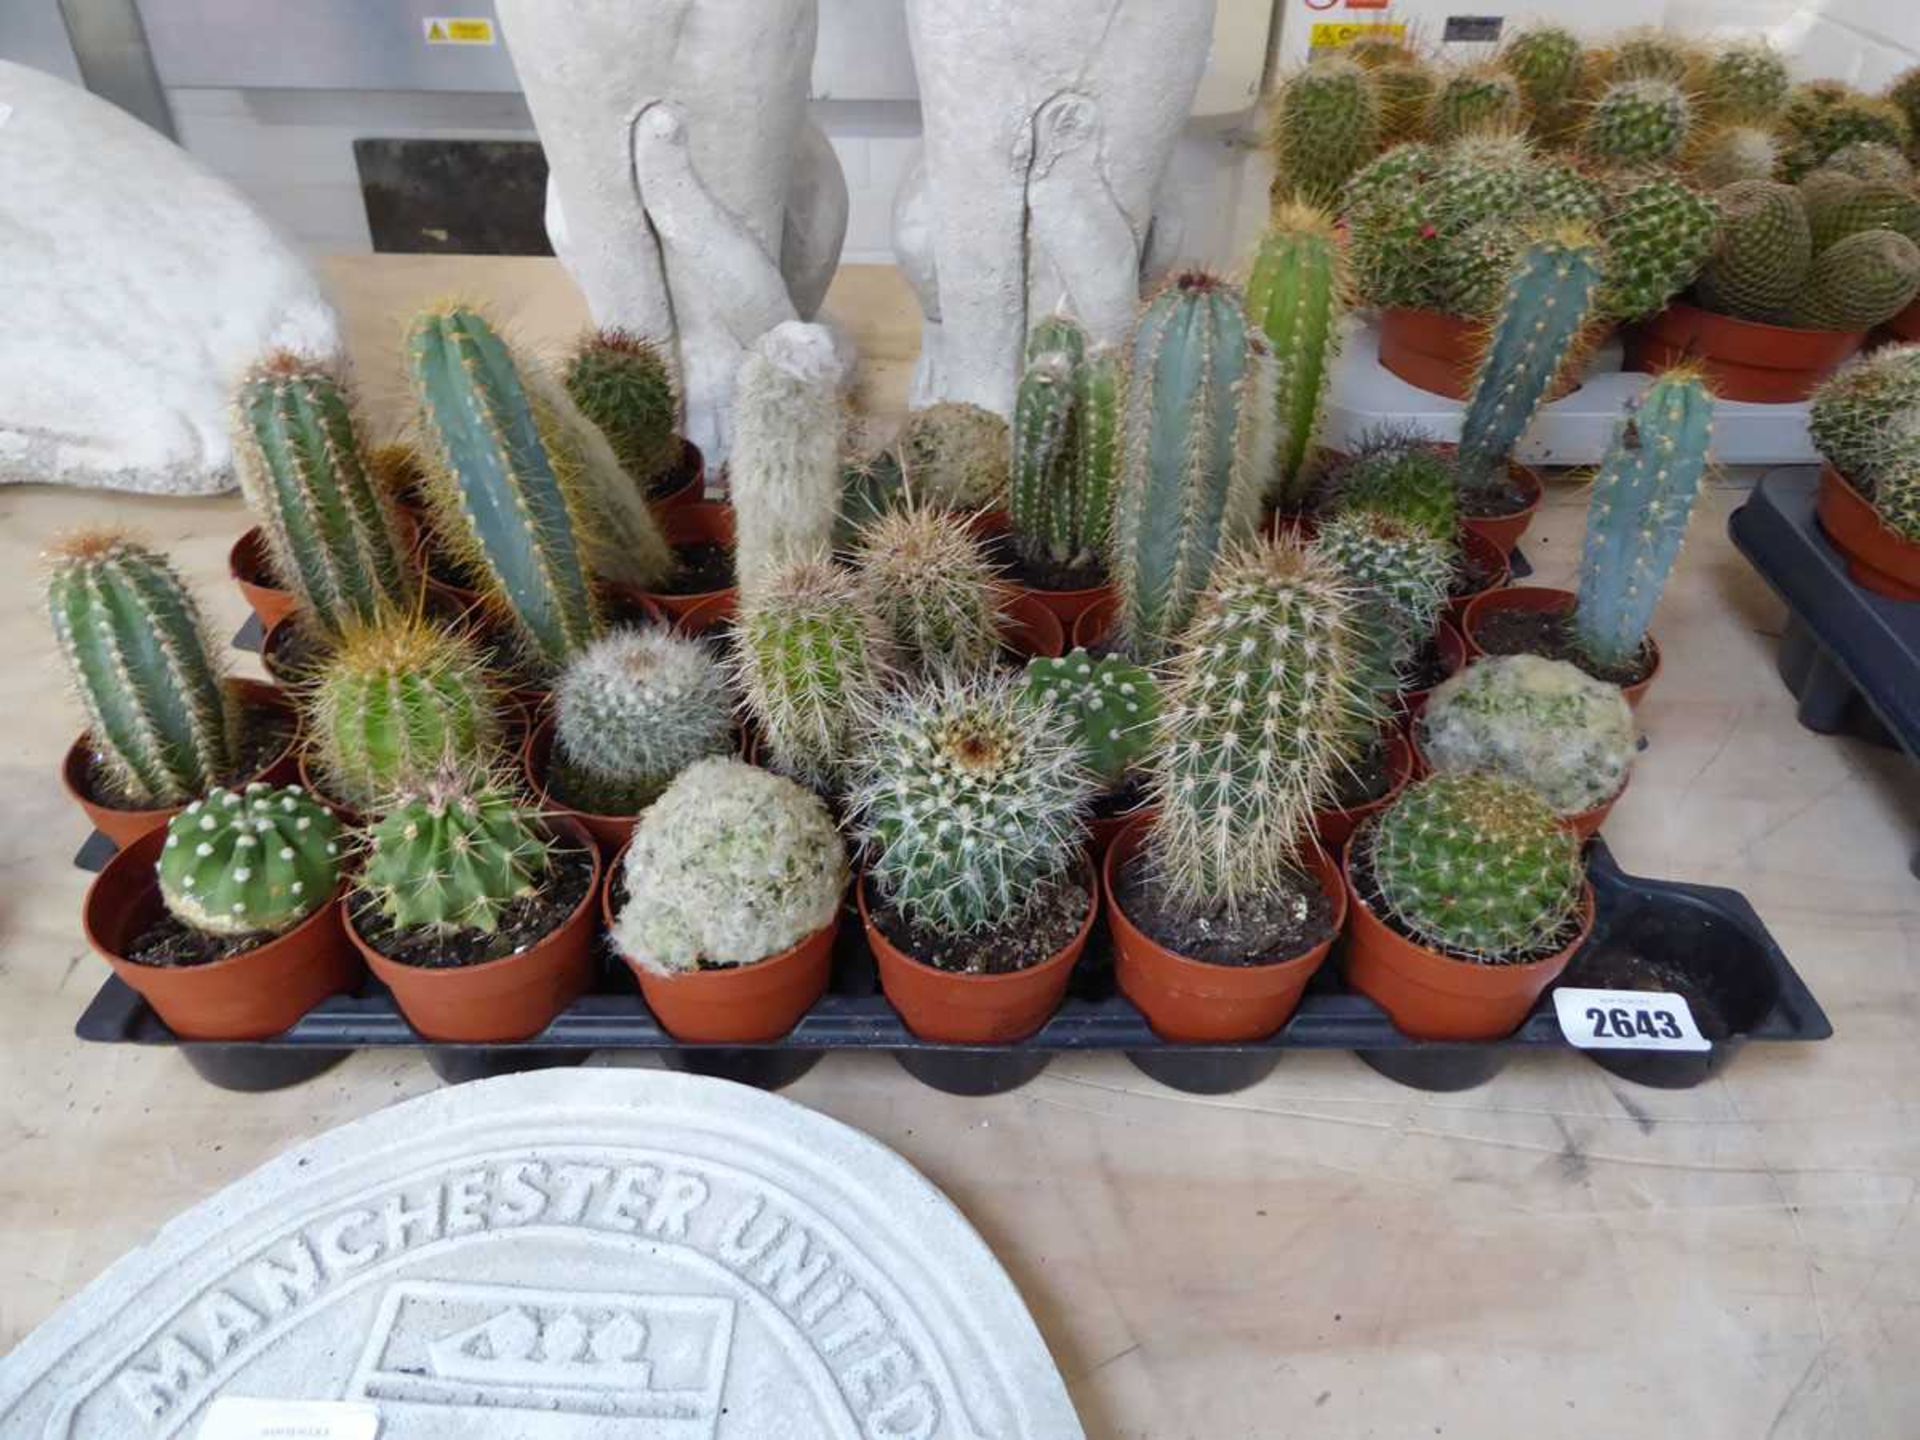 Tray containing approx 20 mixed size cacti